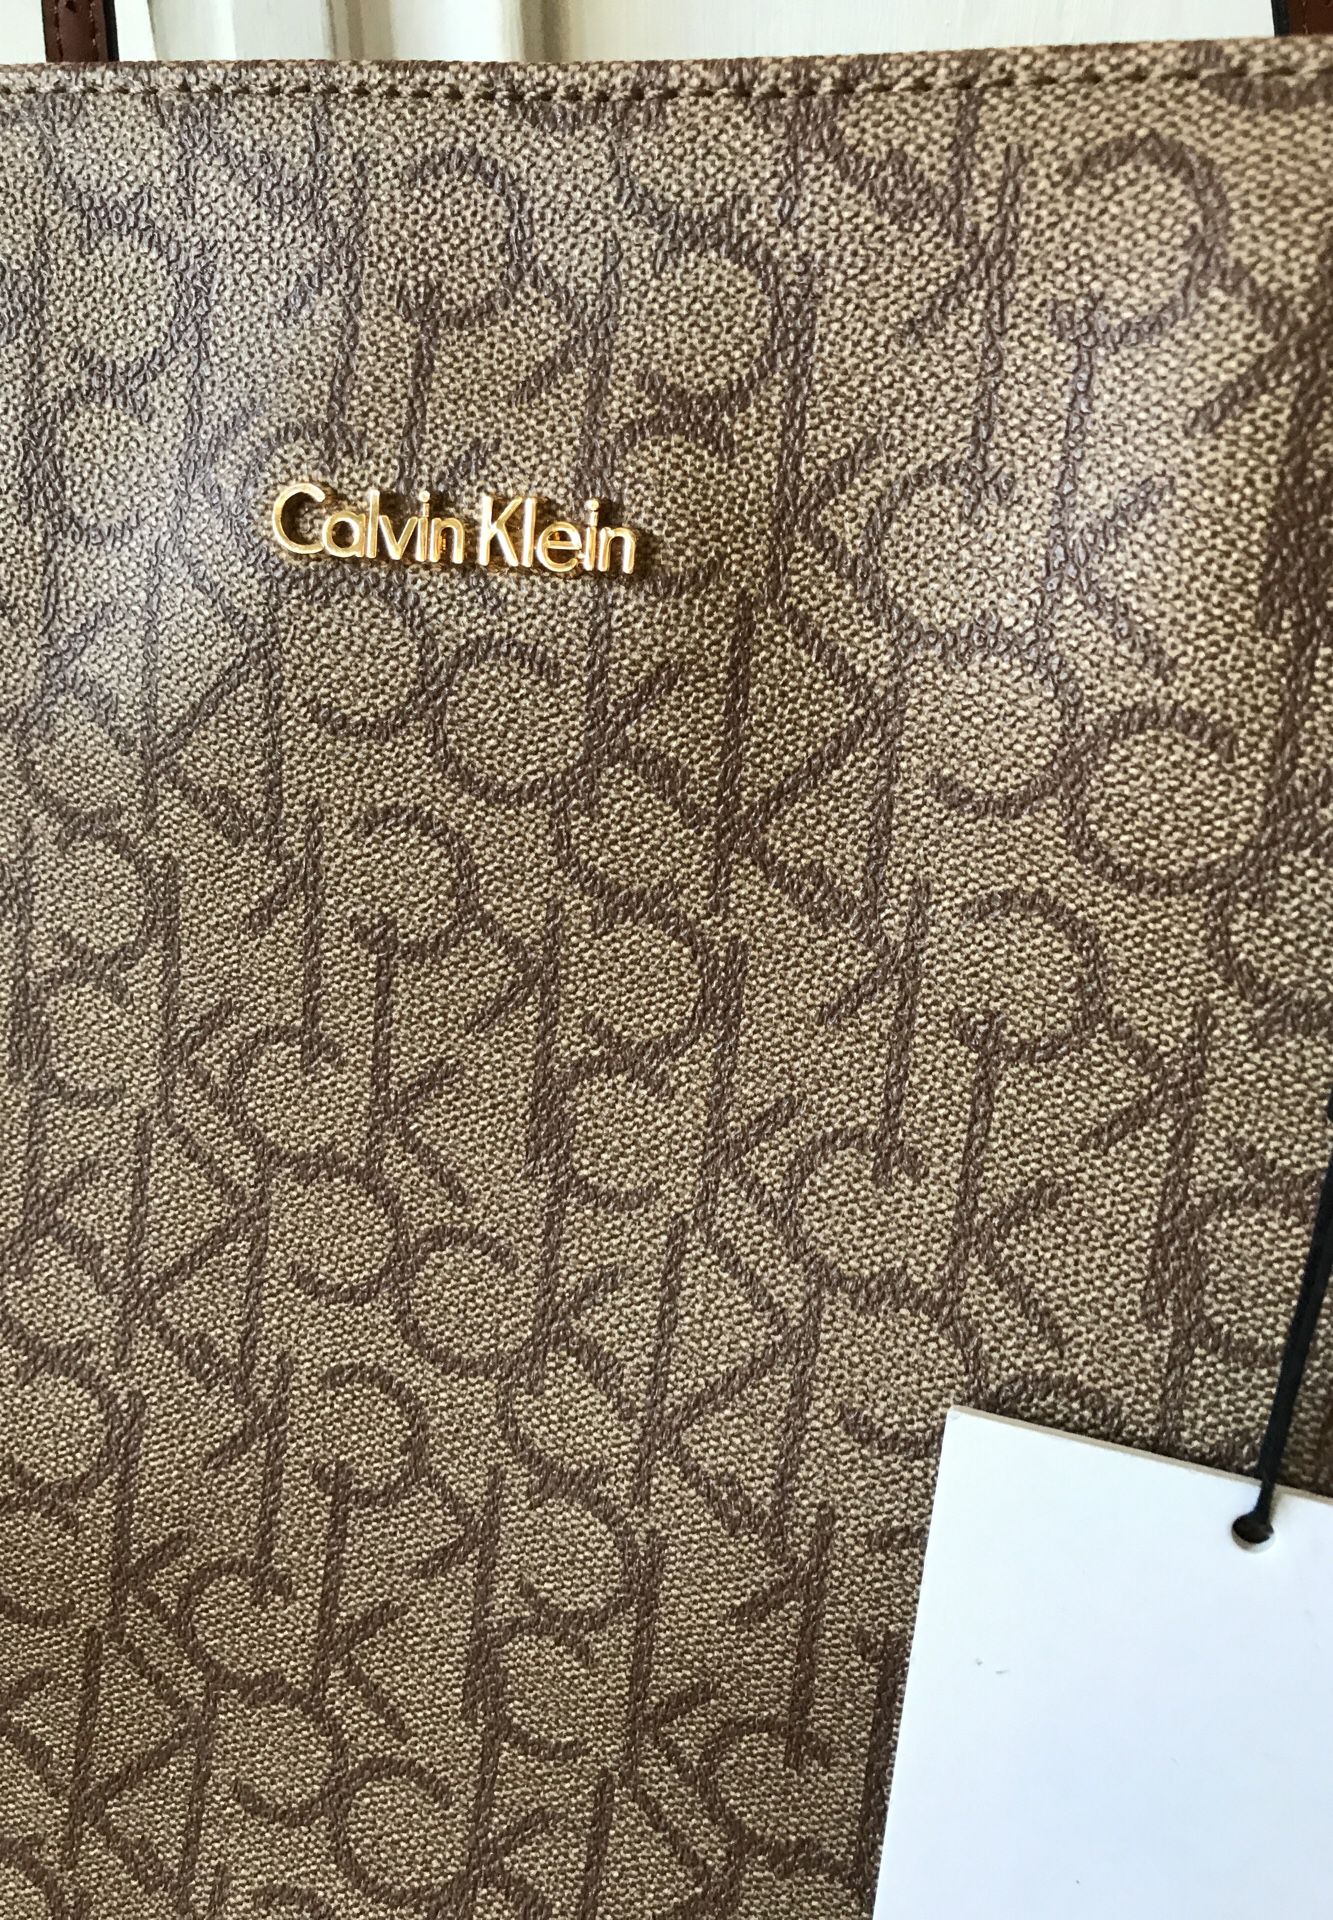 Calvin Klein Hayden Leather Tan Gold Hardware Top Zip Chain Tote LARGE NWT  for Sale in Frankfort, IL - OfferUp